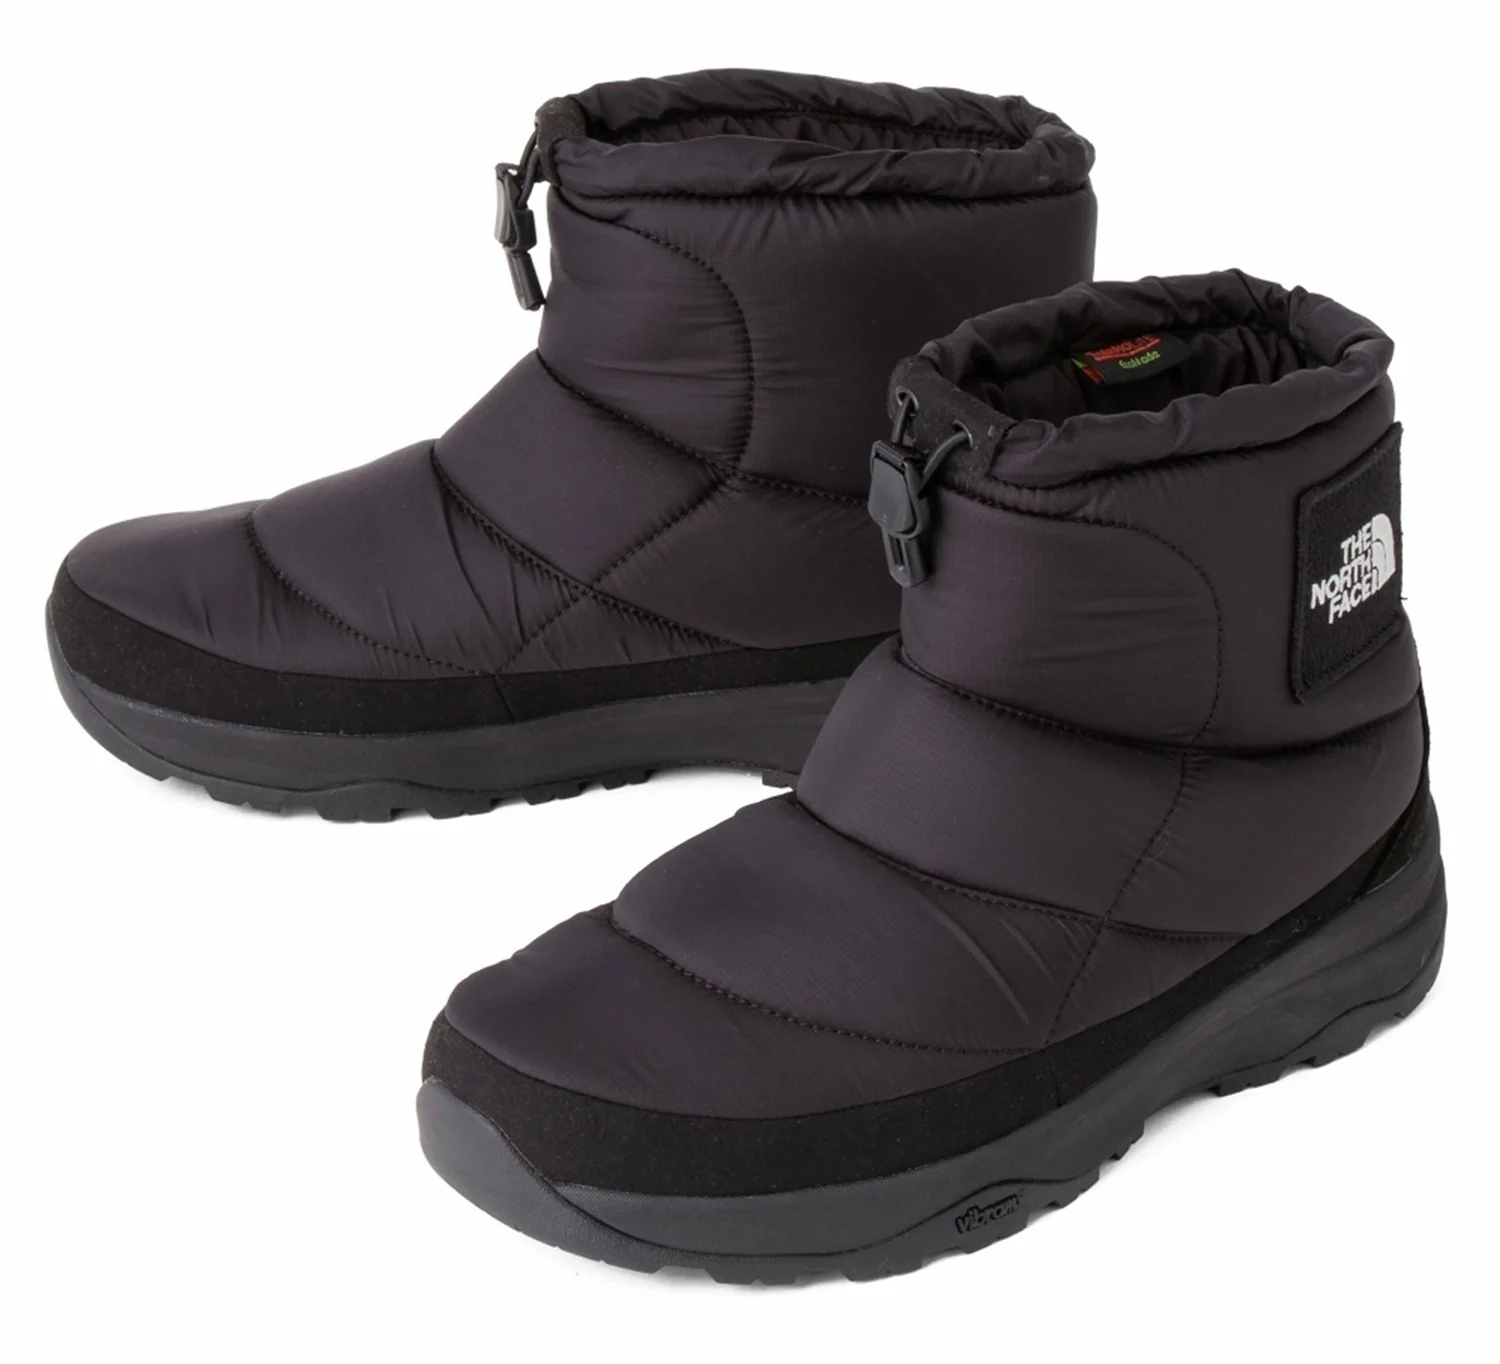 THE NORTH FACE　NF52280 